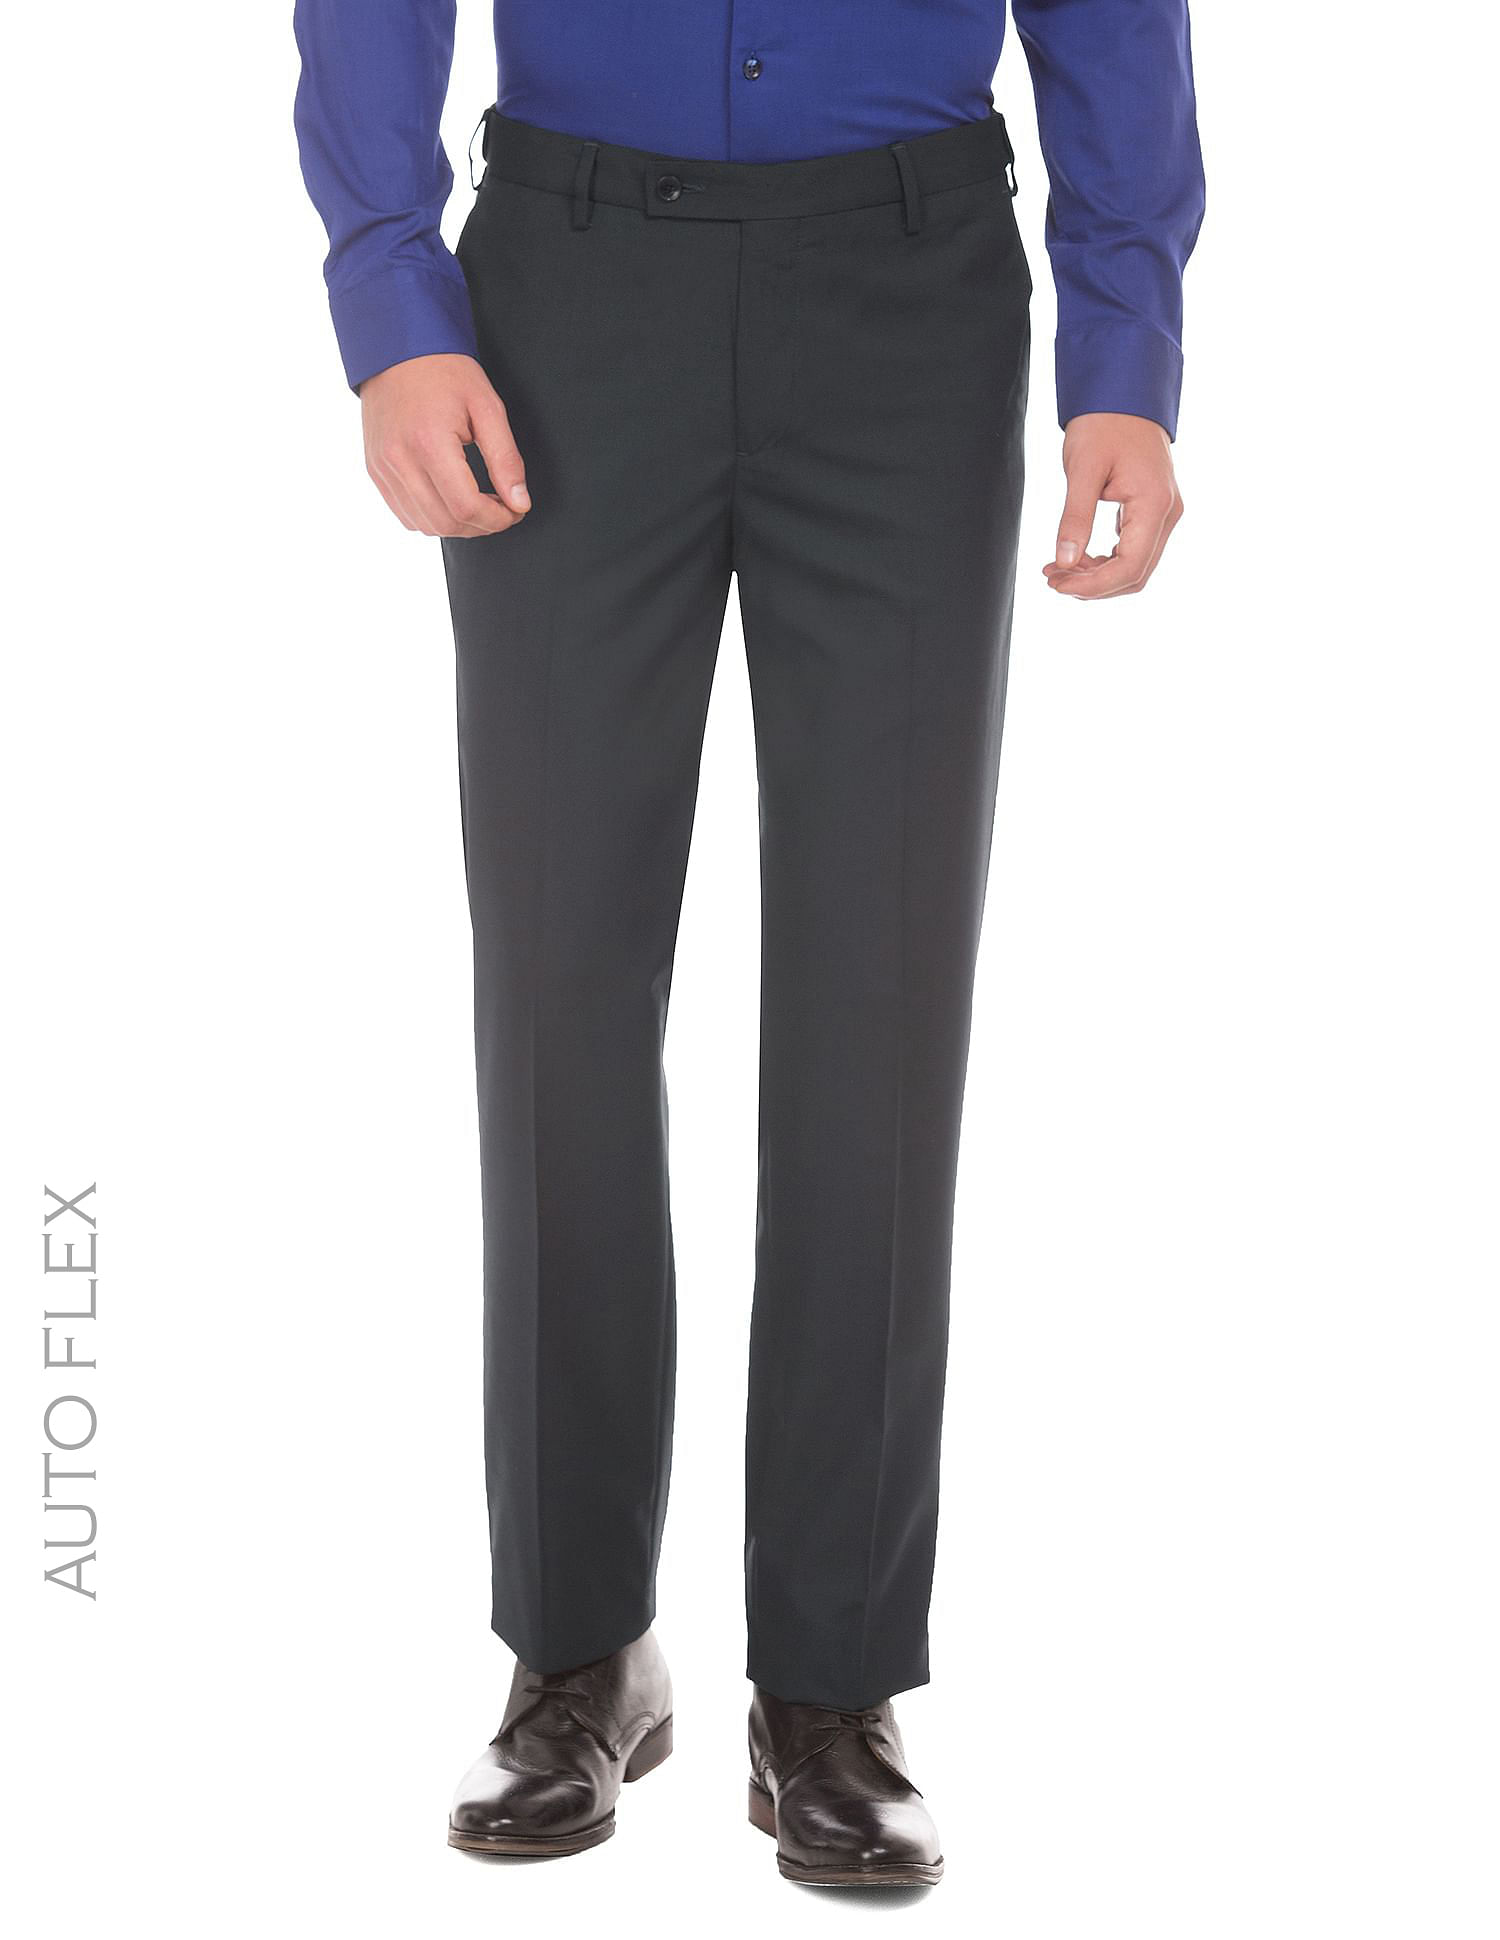 Buy Arrow Navy Checked Formal Trousers at Amazonin